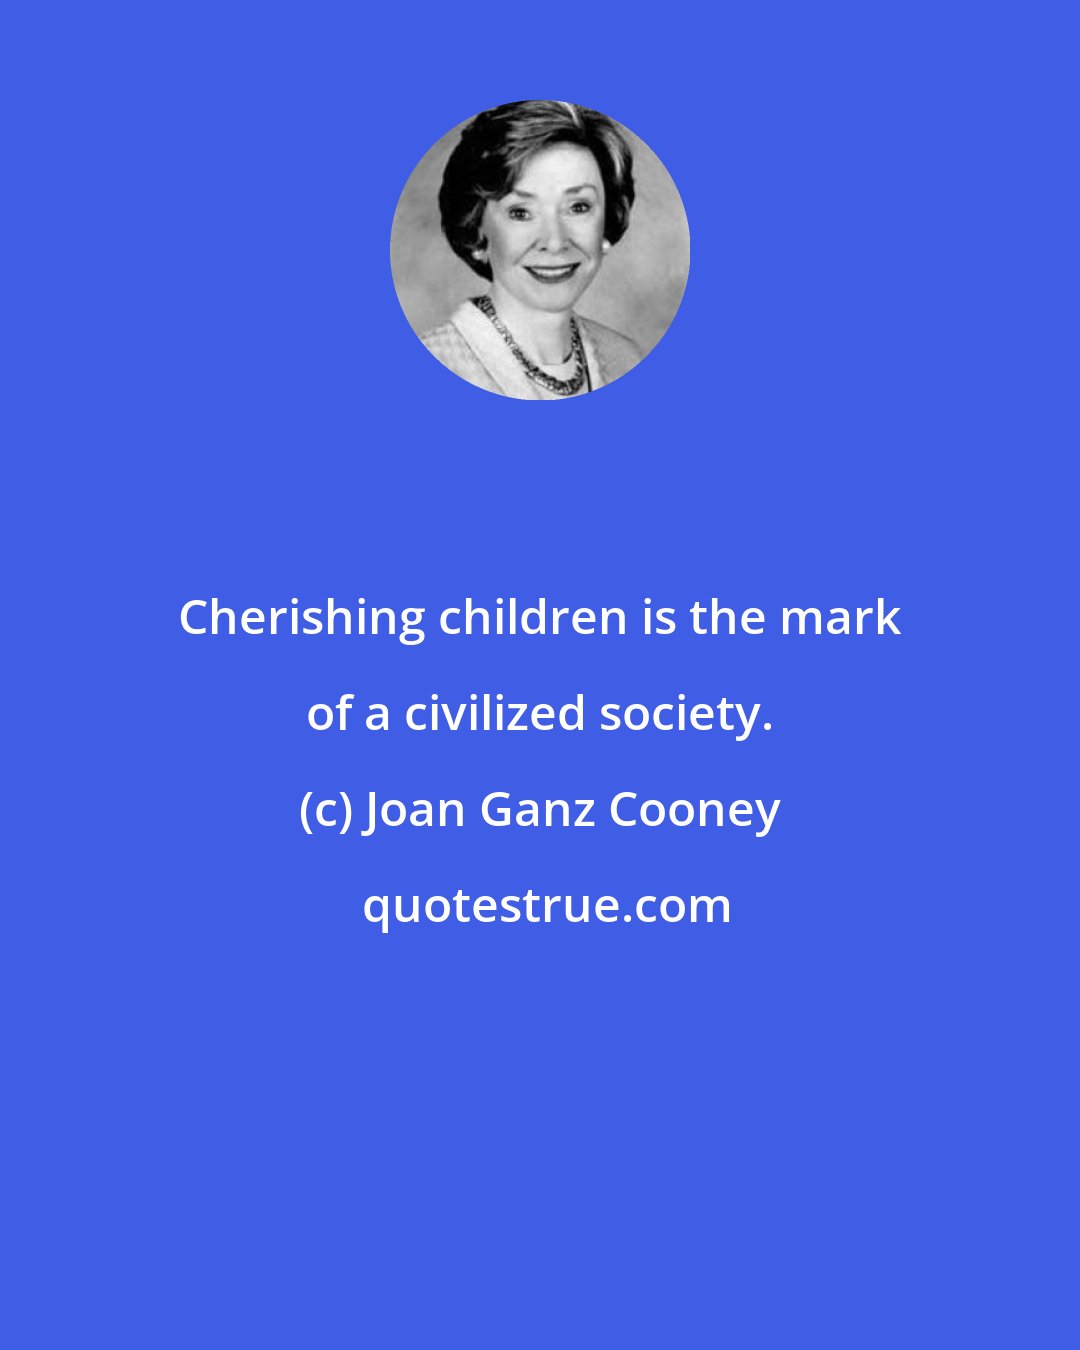 Joan Ganz Cooney: Cherishing children is the mark of a civilized society.